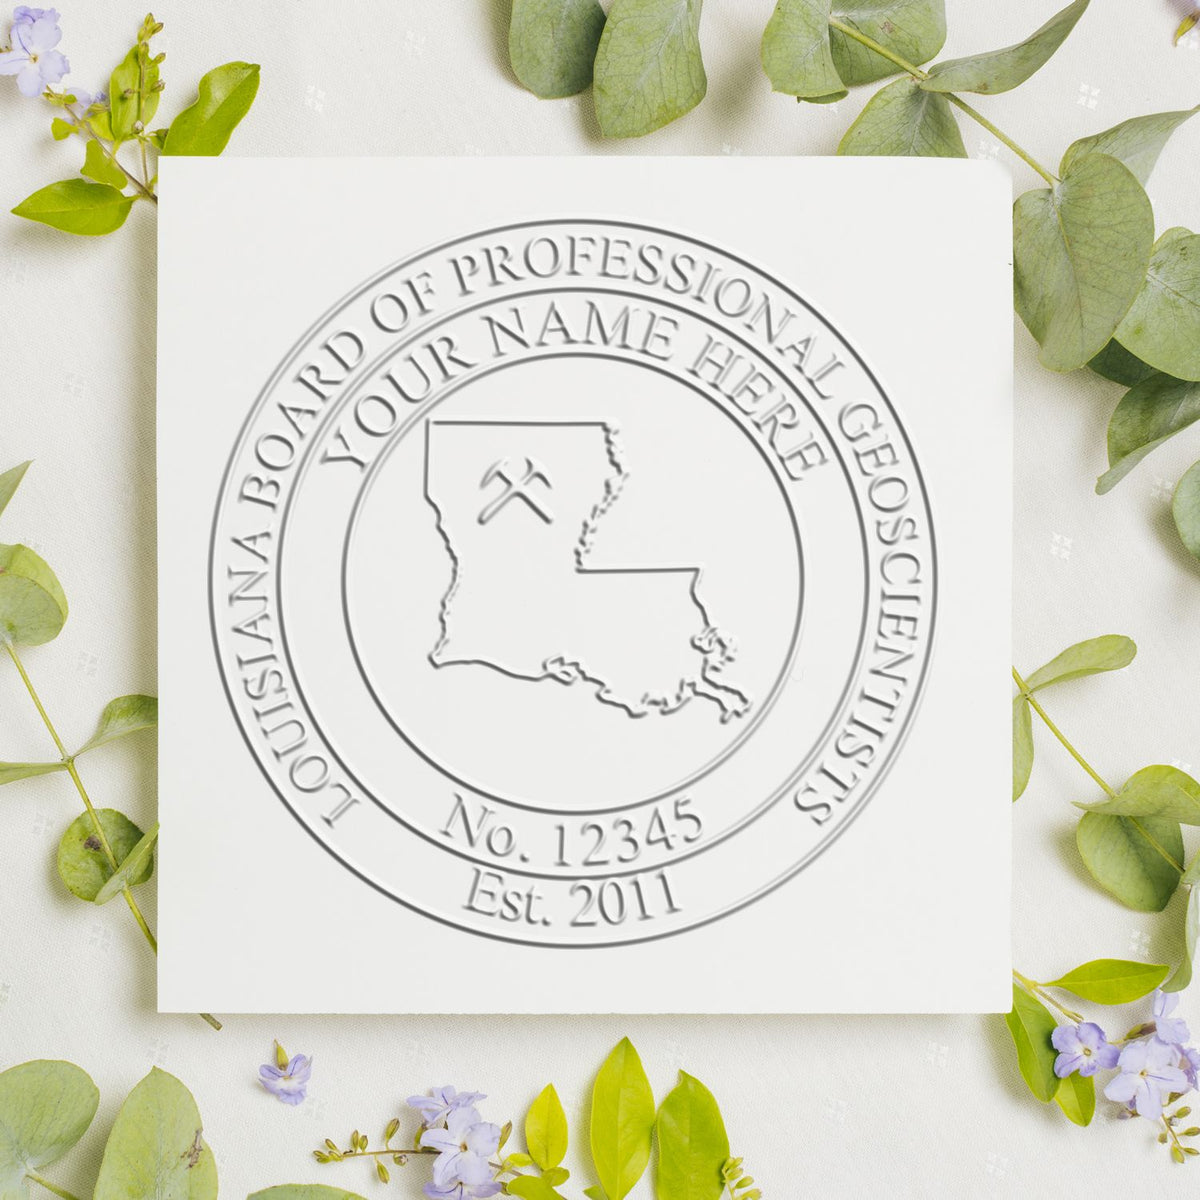 An alternative view of the State of Louisiana Extended Long Reach Geologist Seal stamped on a sheet of paper showing the image in use